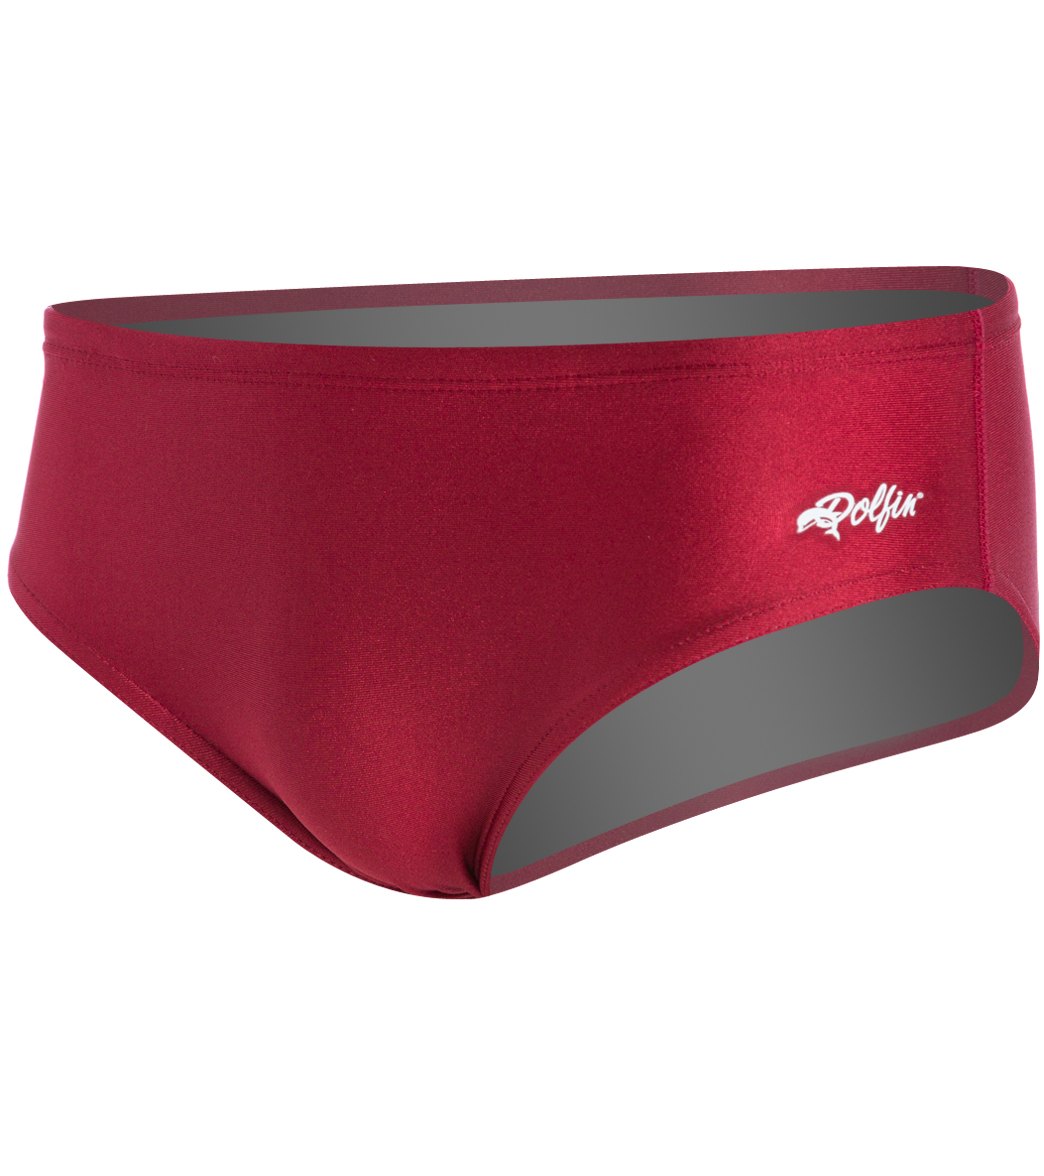 Dolfin Xtra Life Lycra Solid Male Racer Brief Swimsuit - Maroon 28 - Swimoutlet.com